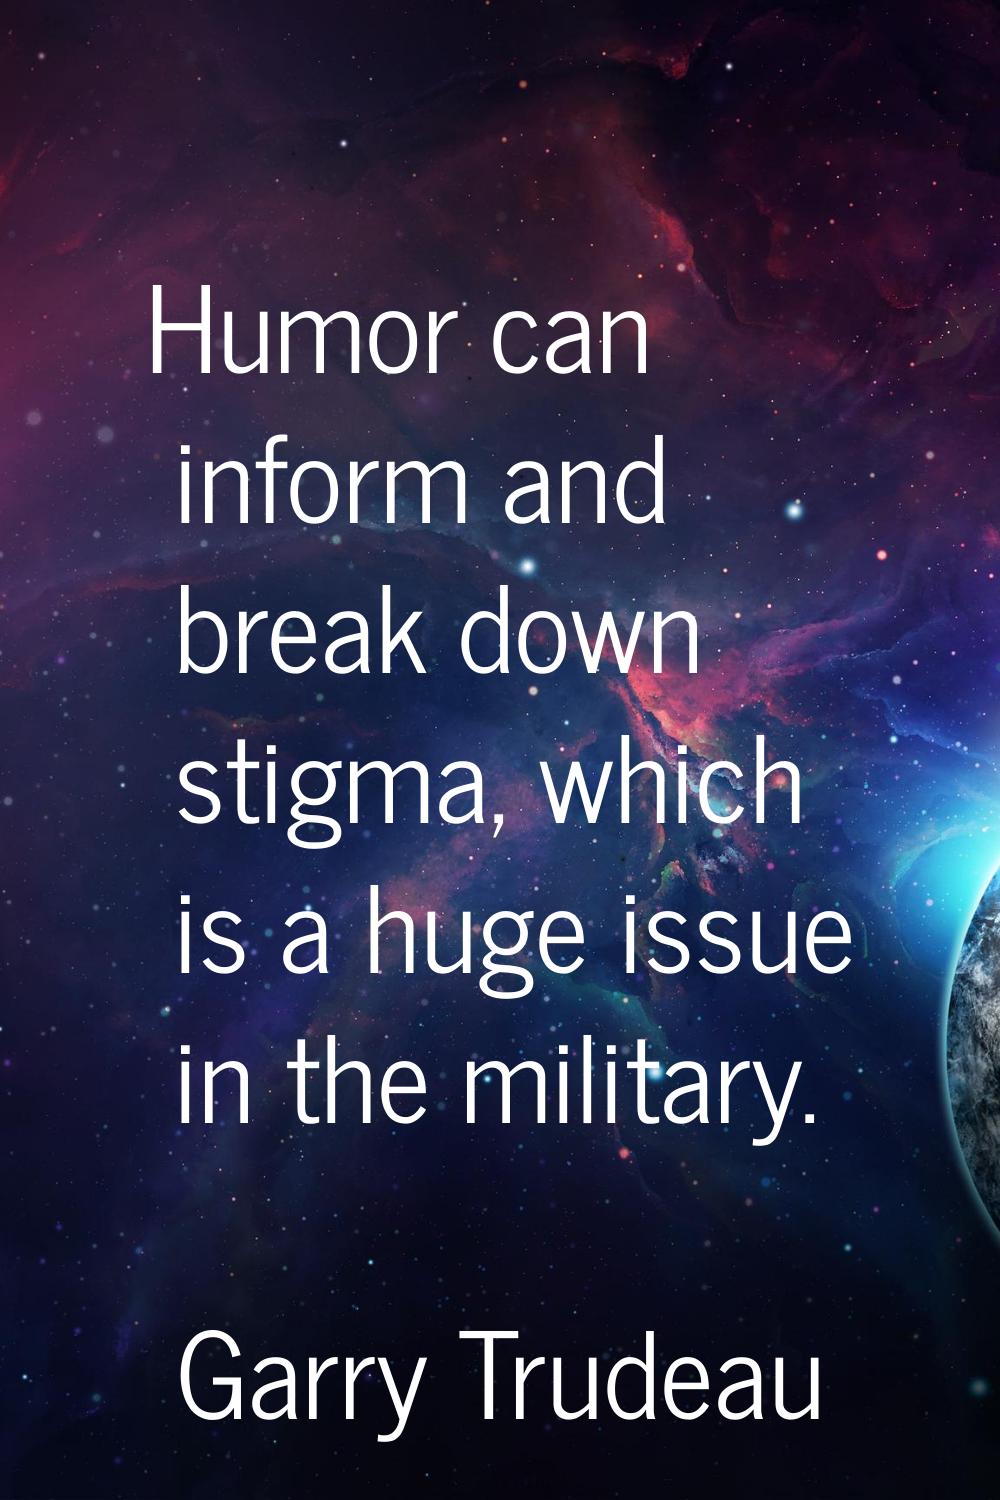 Humor can inform and break down stigma, which is a huge issue in the military.